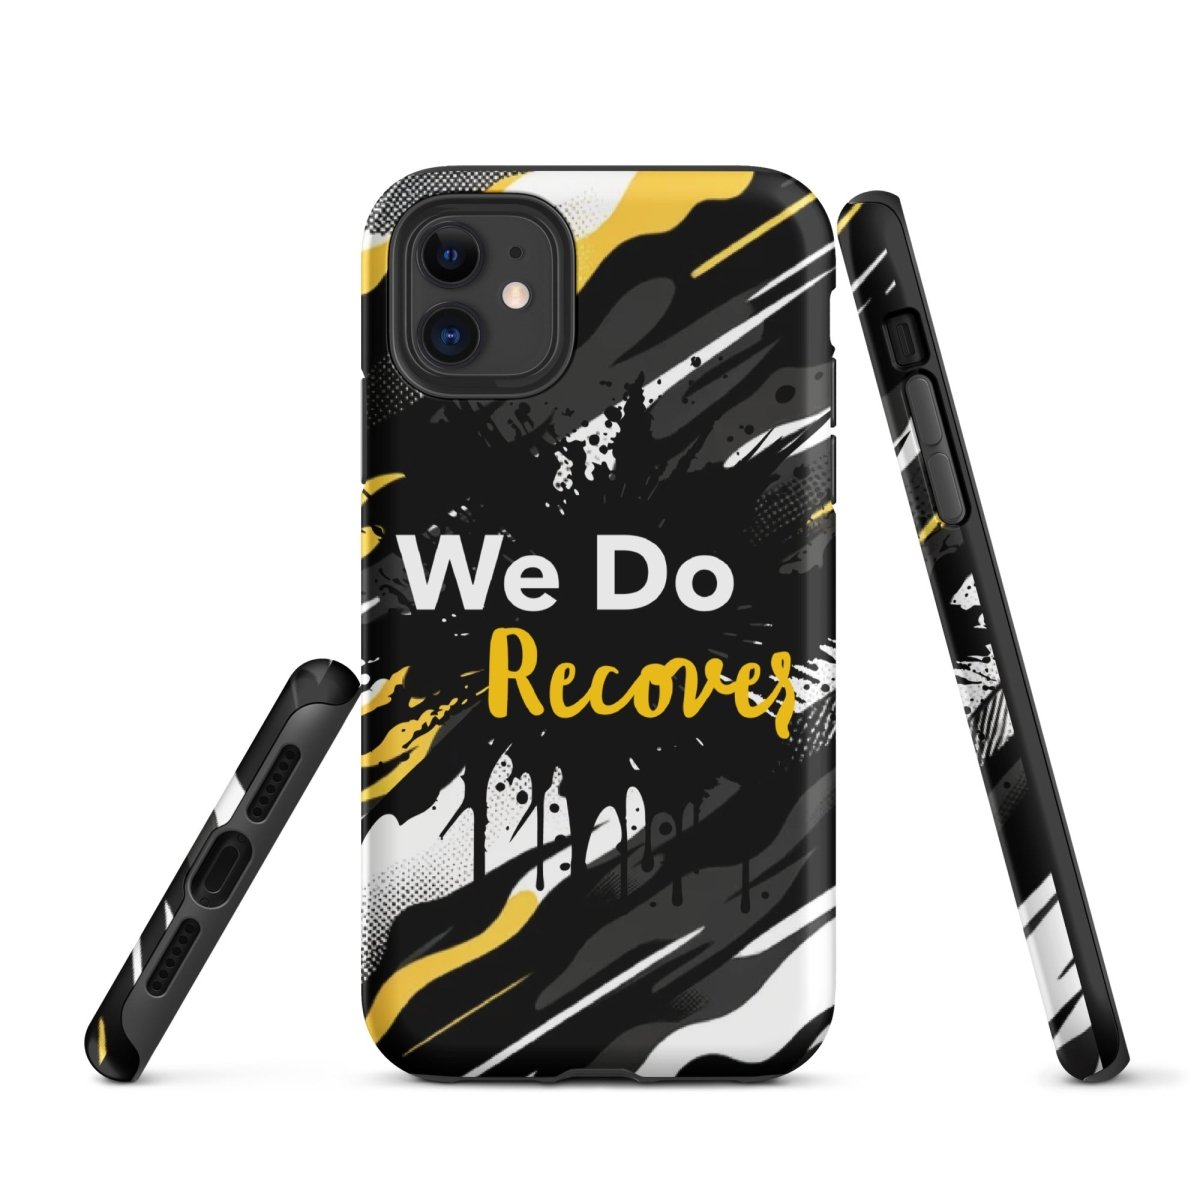 We Do Recover - Impact-Resistant iPhone® Case - Sobervation